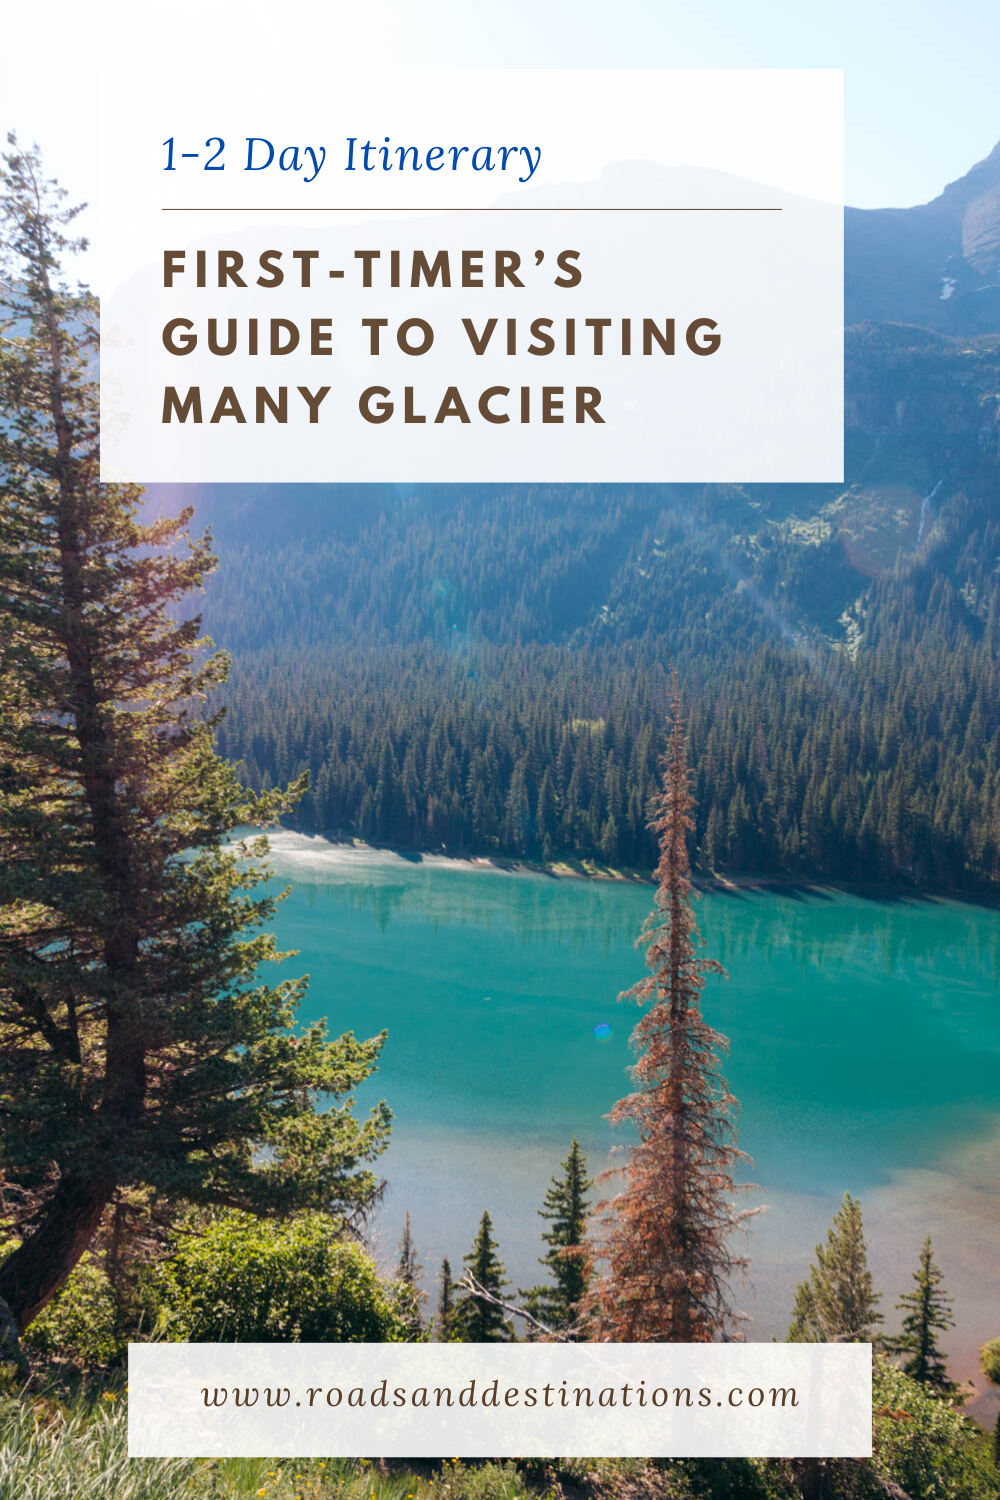 First-timer's Guide to Visiting Many Glacier: 1-2 Day Itinerary - Roads and Destinations